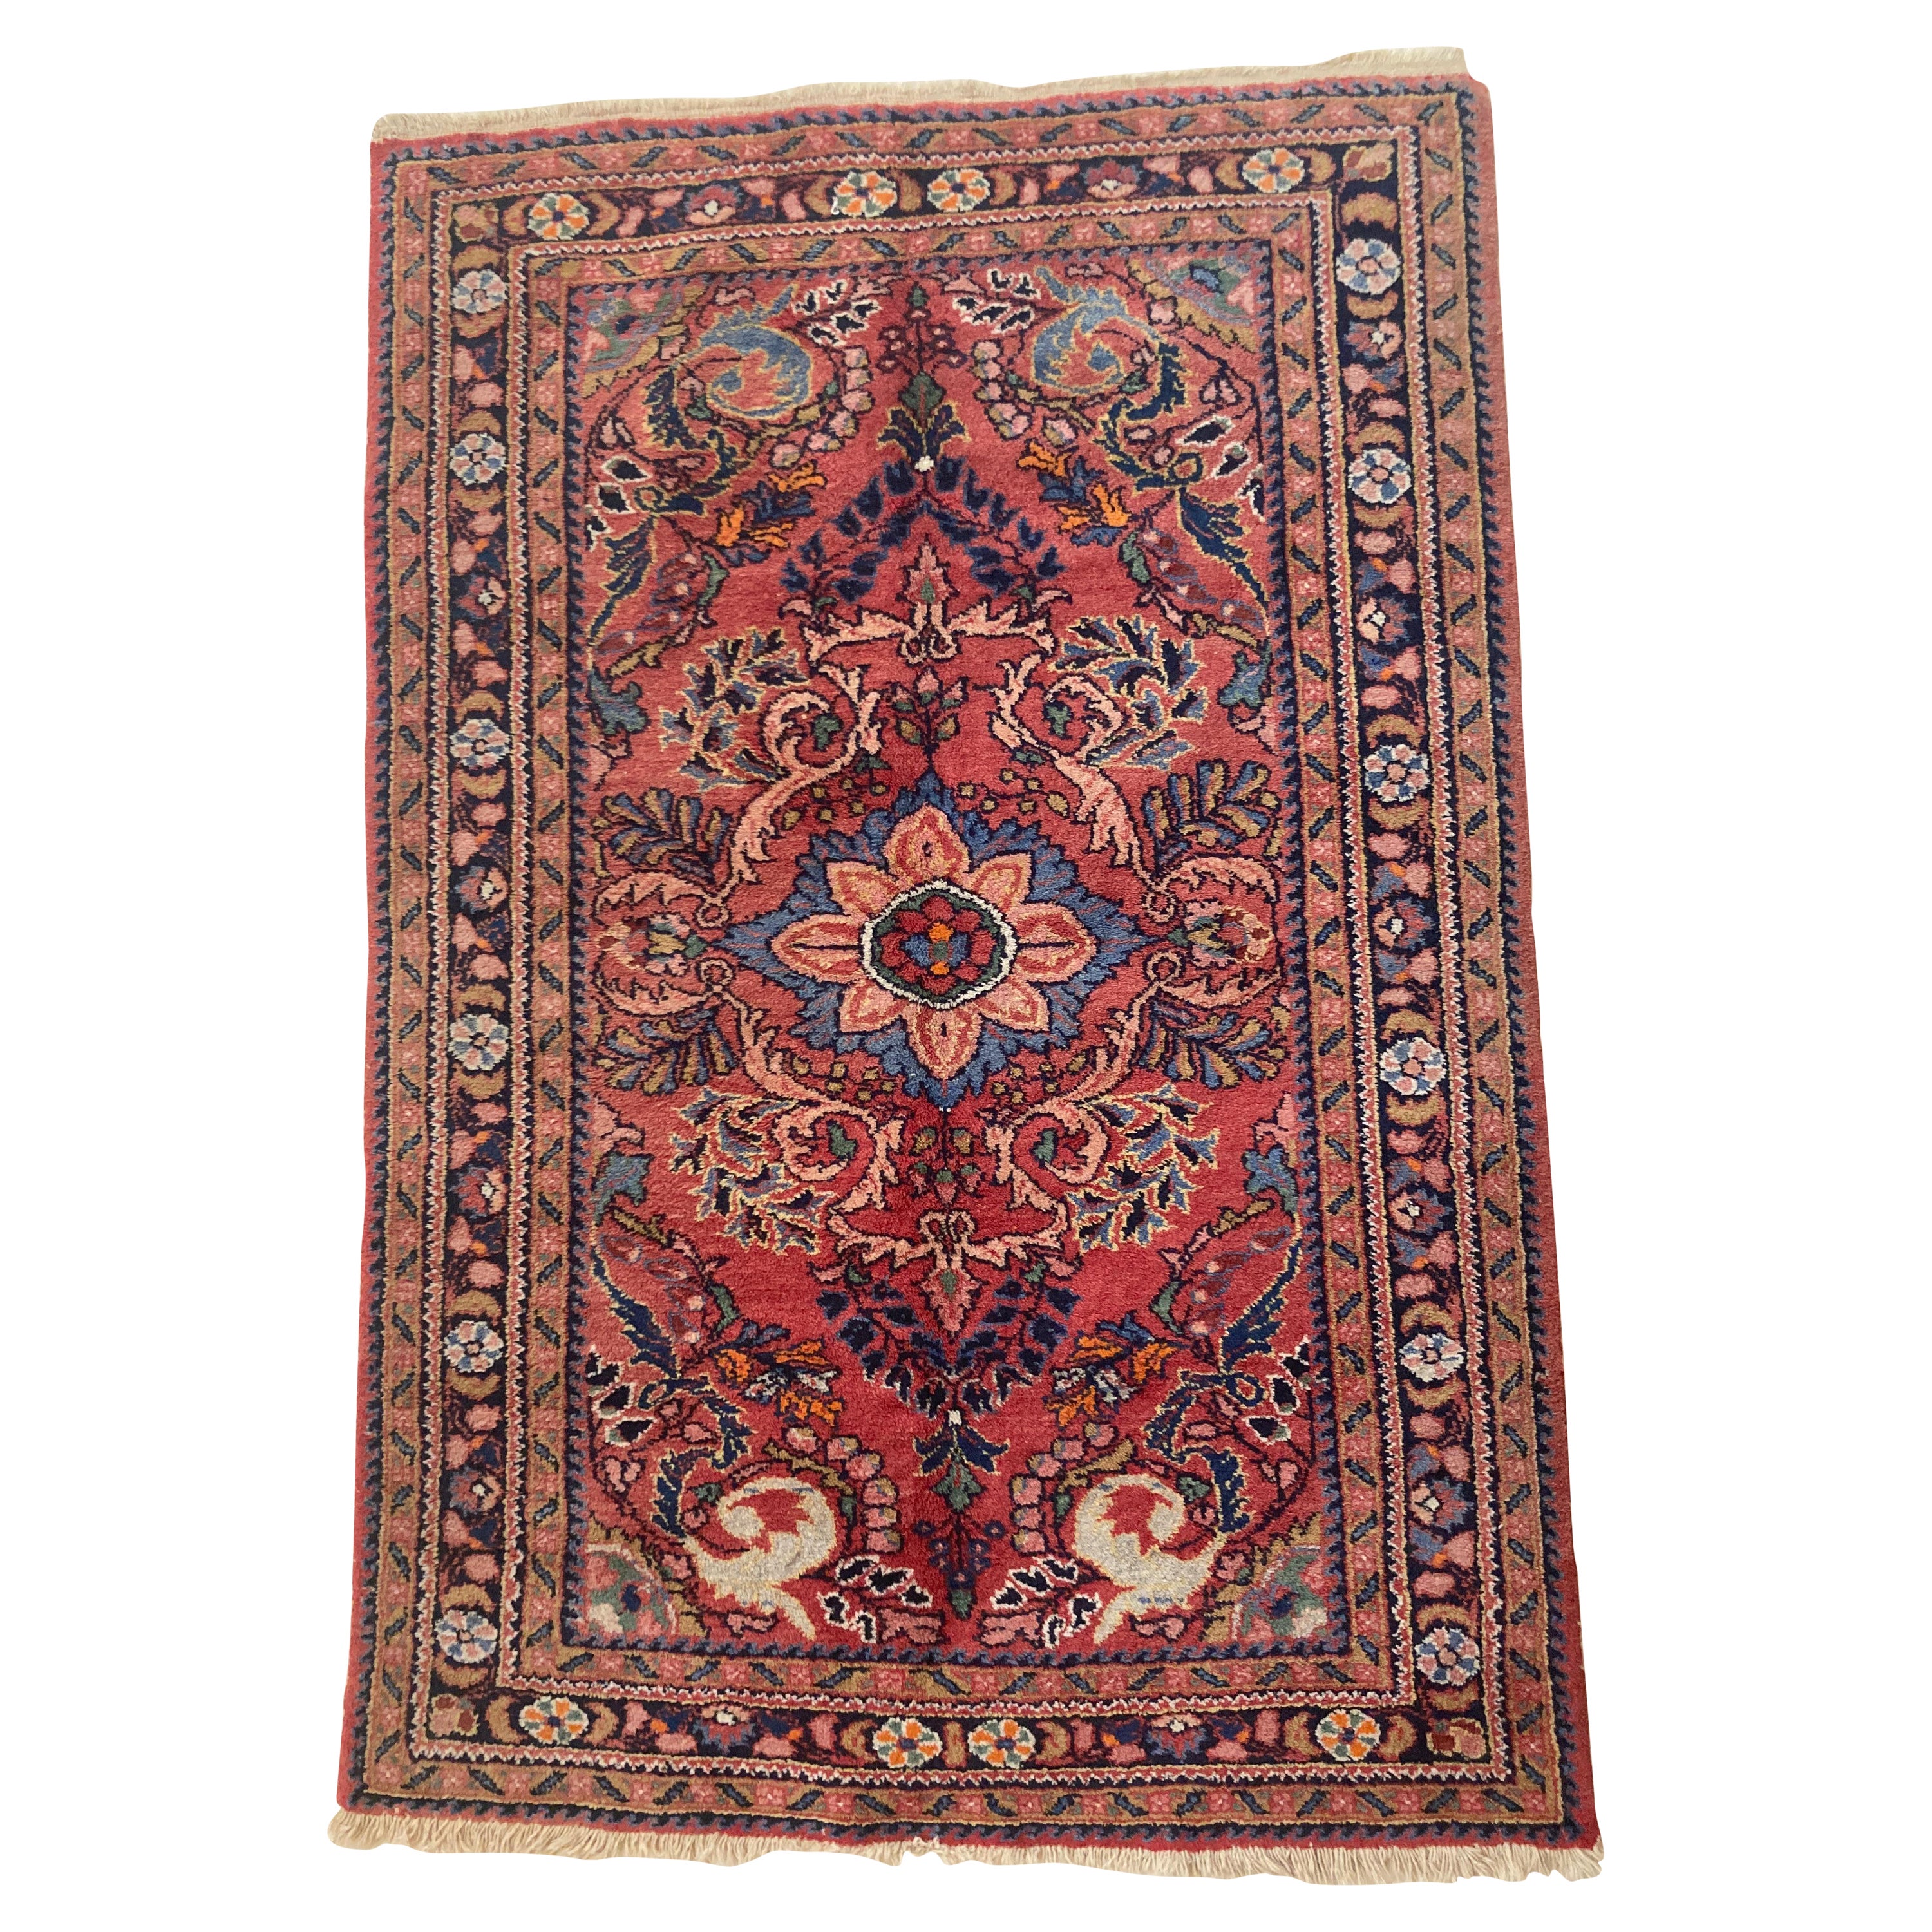 Antique Turkish Hand-Knotted Ethnic Rug, 1940